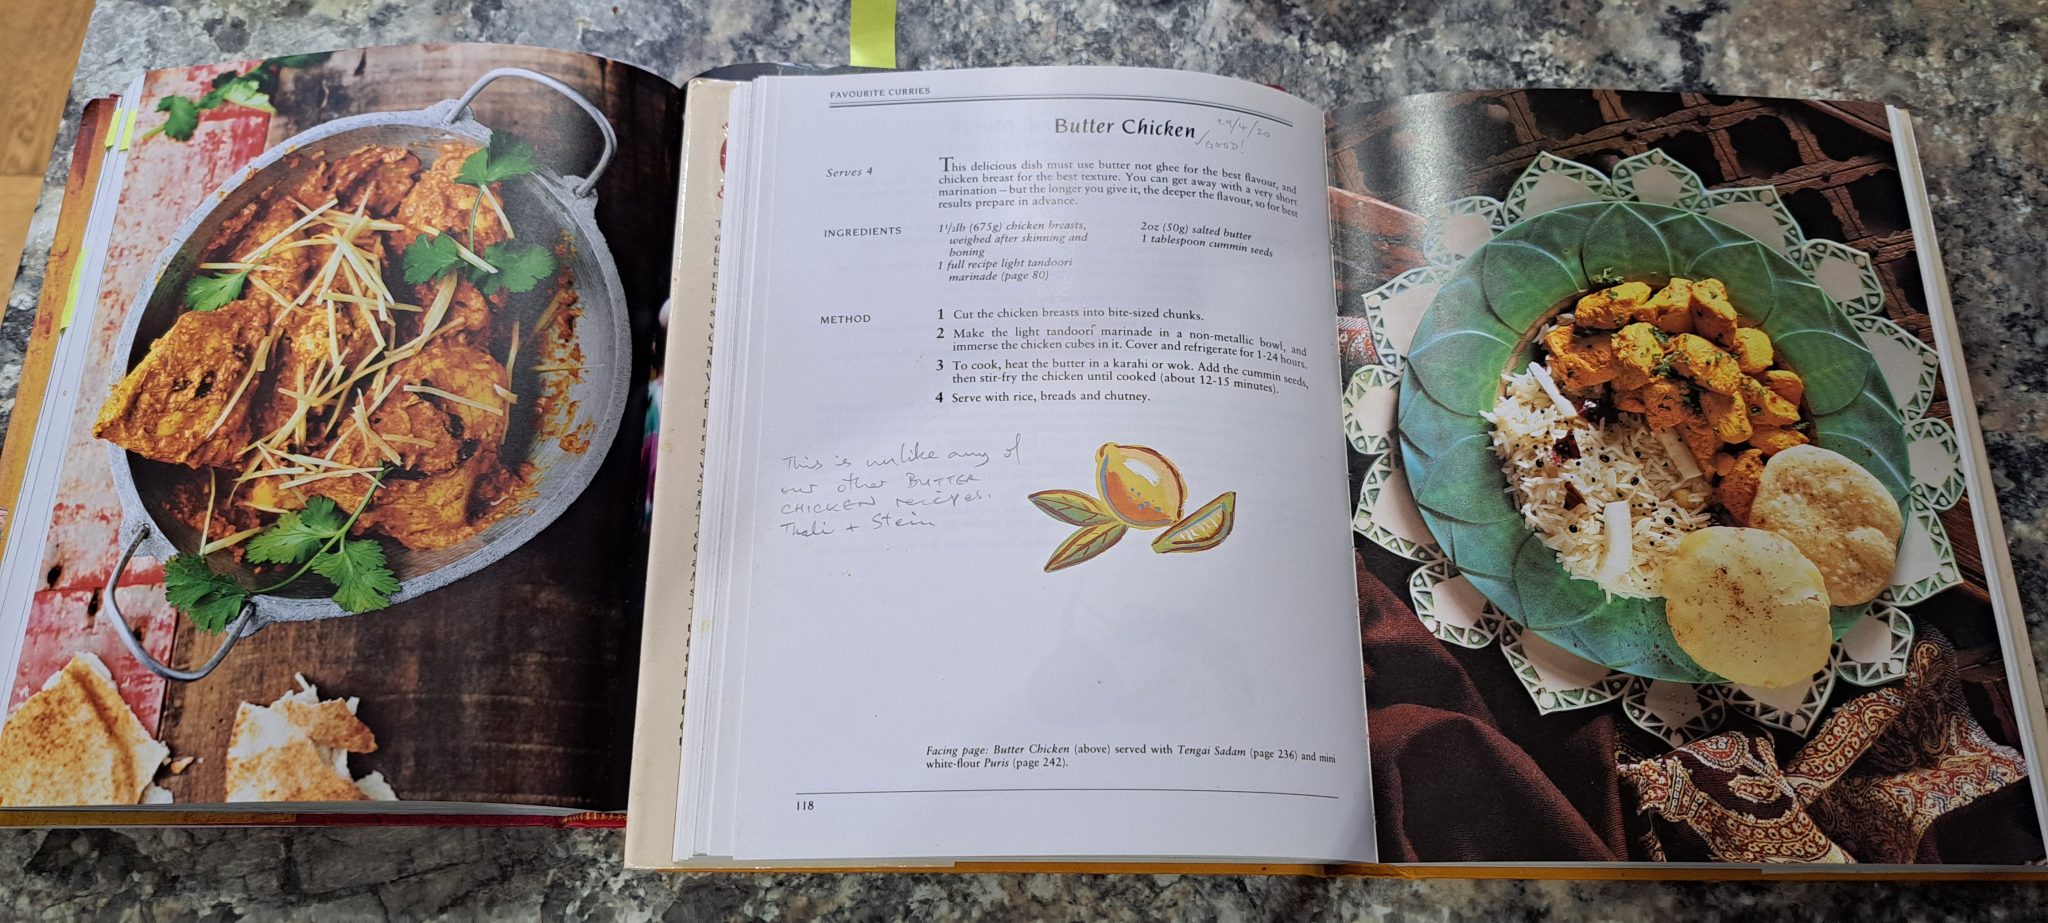 Two recipe books with different butter chicken recipes.